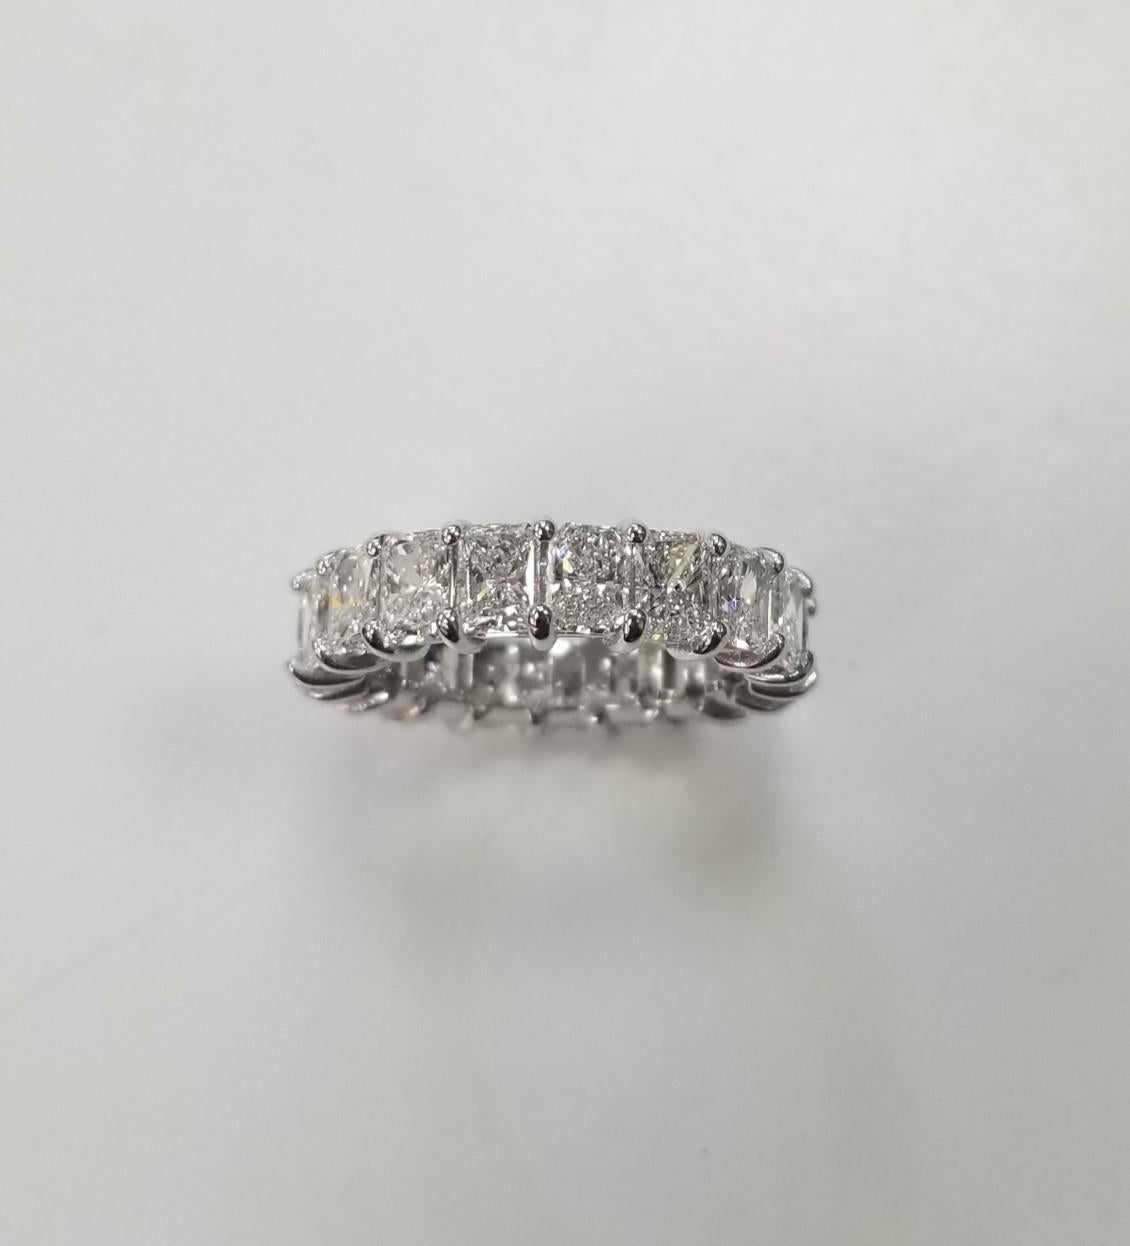 Radiant Cut Diamond 6.03cts. Eternity Ring Set in 14k White Gold In New Condition For Sale In Los Angeles, CA